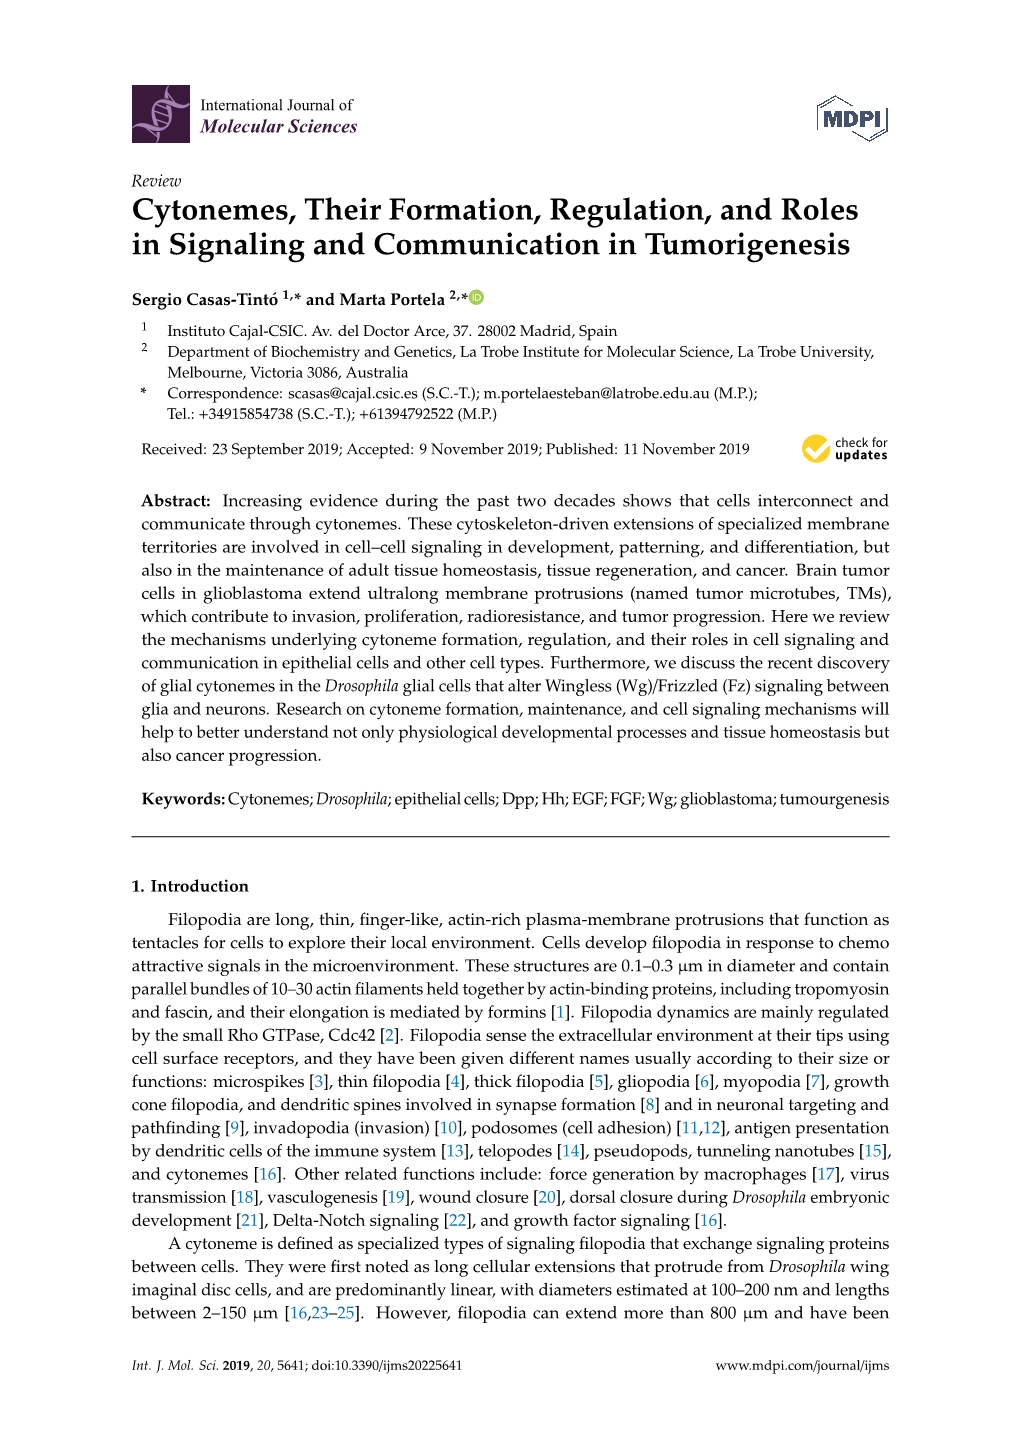 Cytonemes, Their Formation, Regulation, and Roles in Signaling and Communication in Tumorigenesis